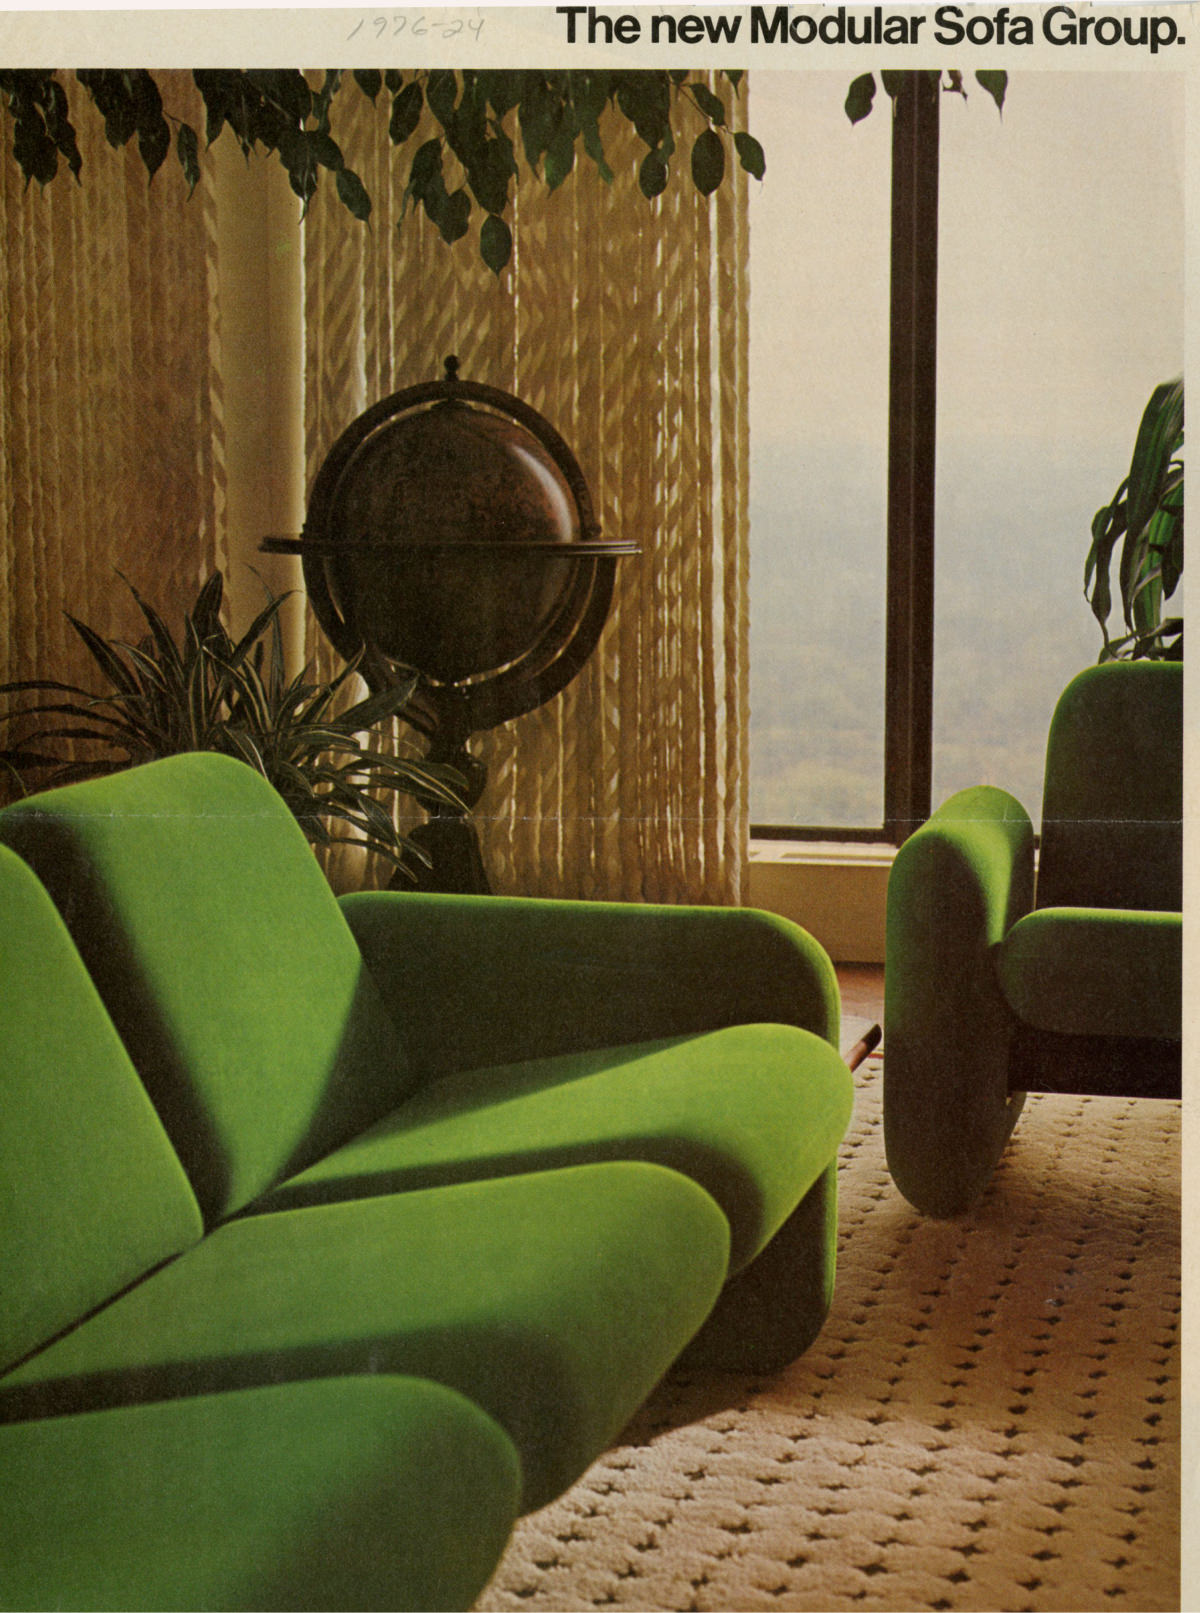 “The new Modular Sofa Group” brochure from 1976 featuring two green Wilkes Modular Sofas perpendicularly placed in an office with a globe.